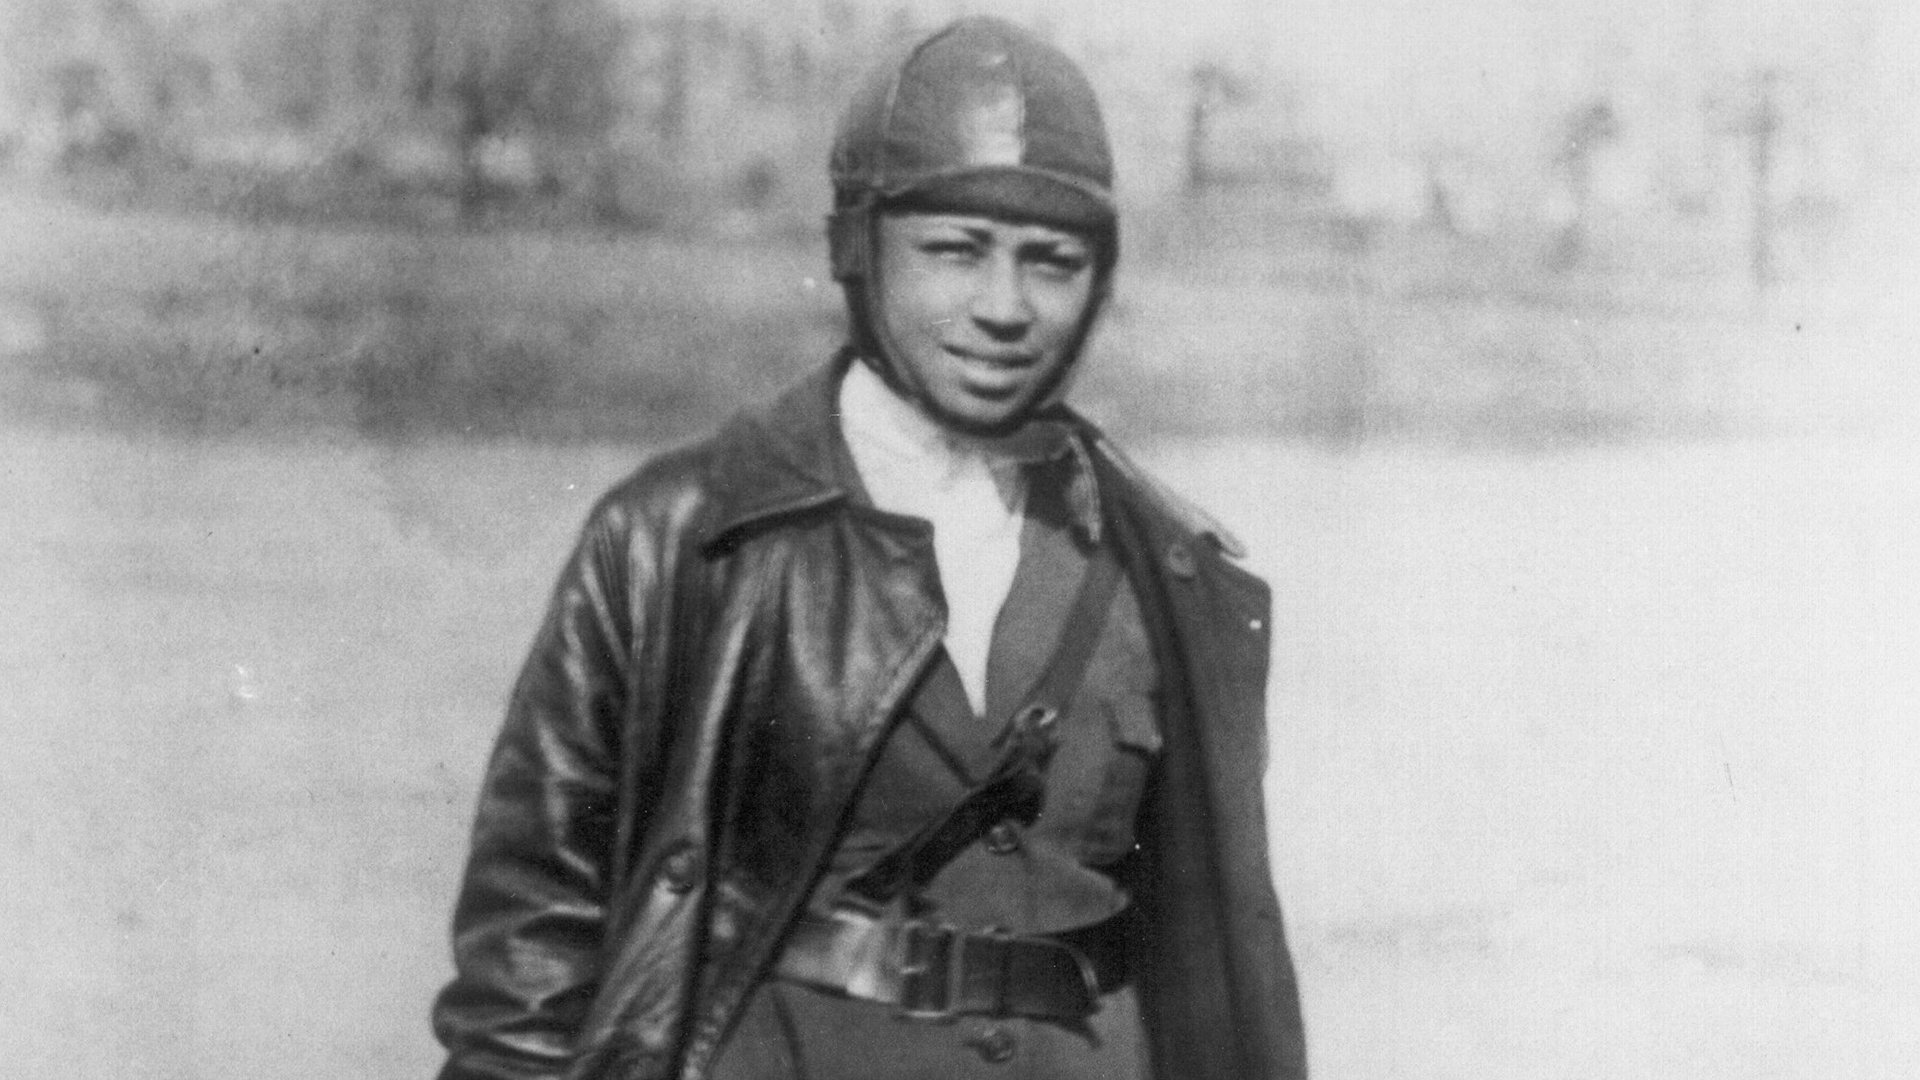 January 26, 1892: Bessie Coleman Was Born and Became the First Black Woman to Earn a Pilot's License